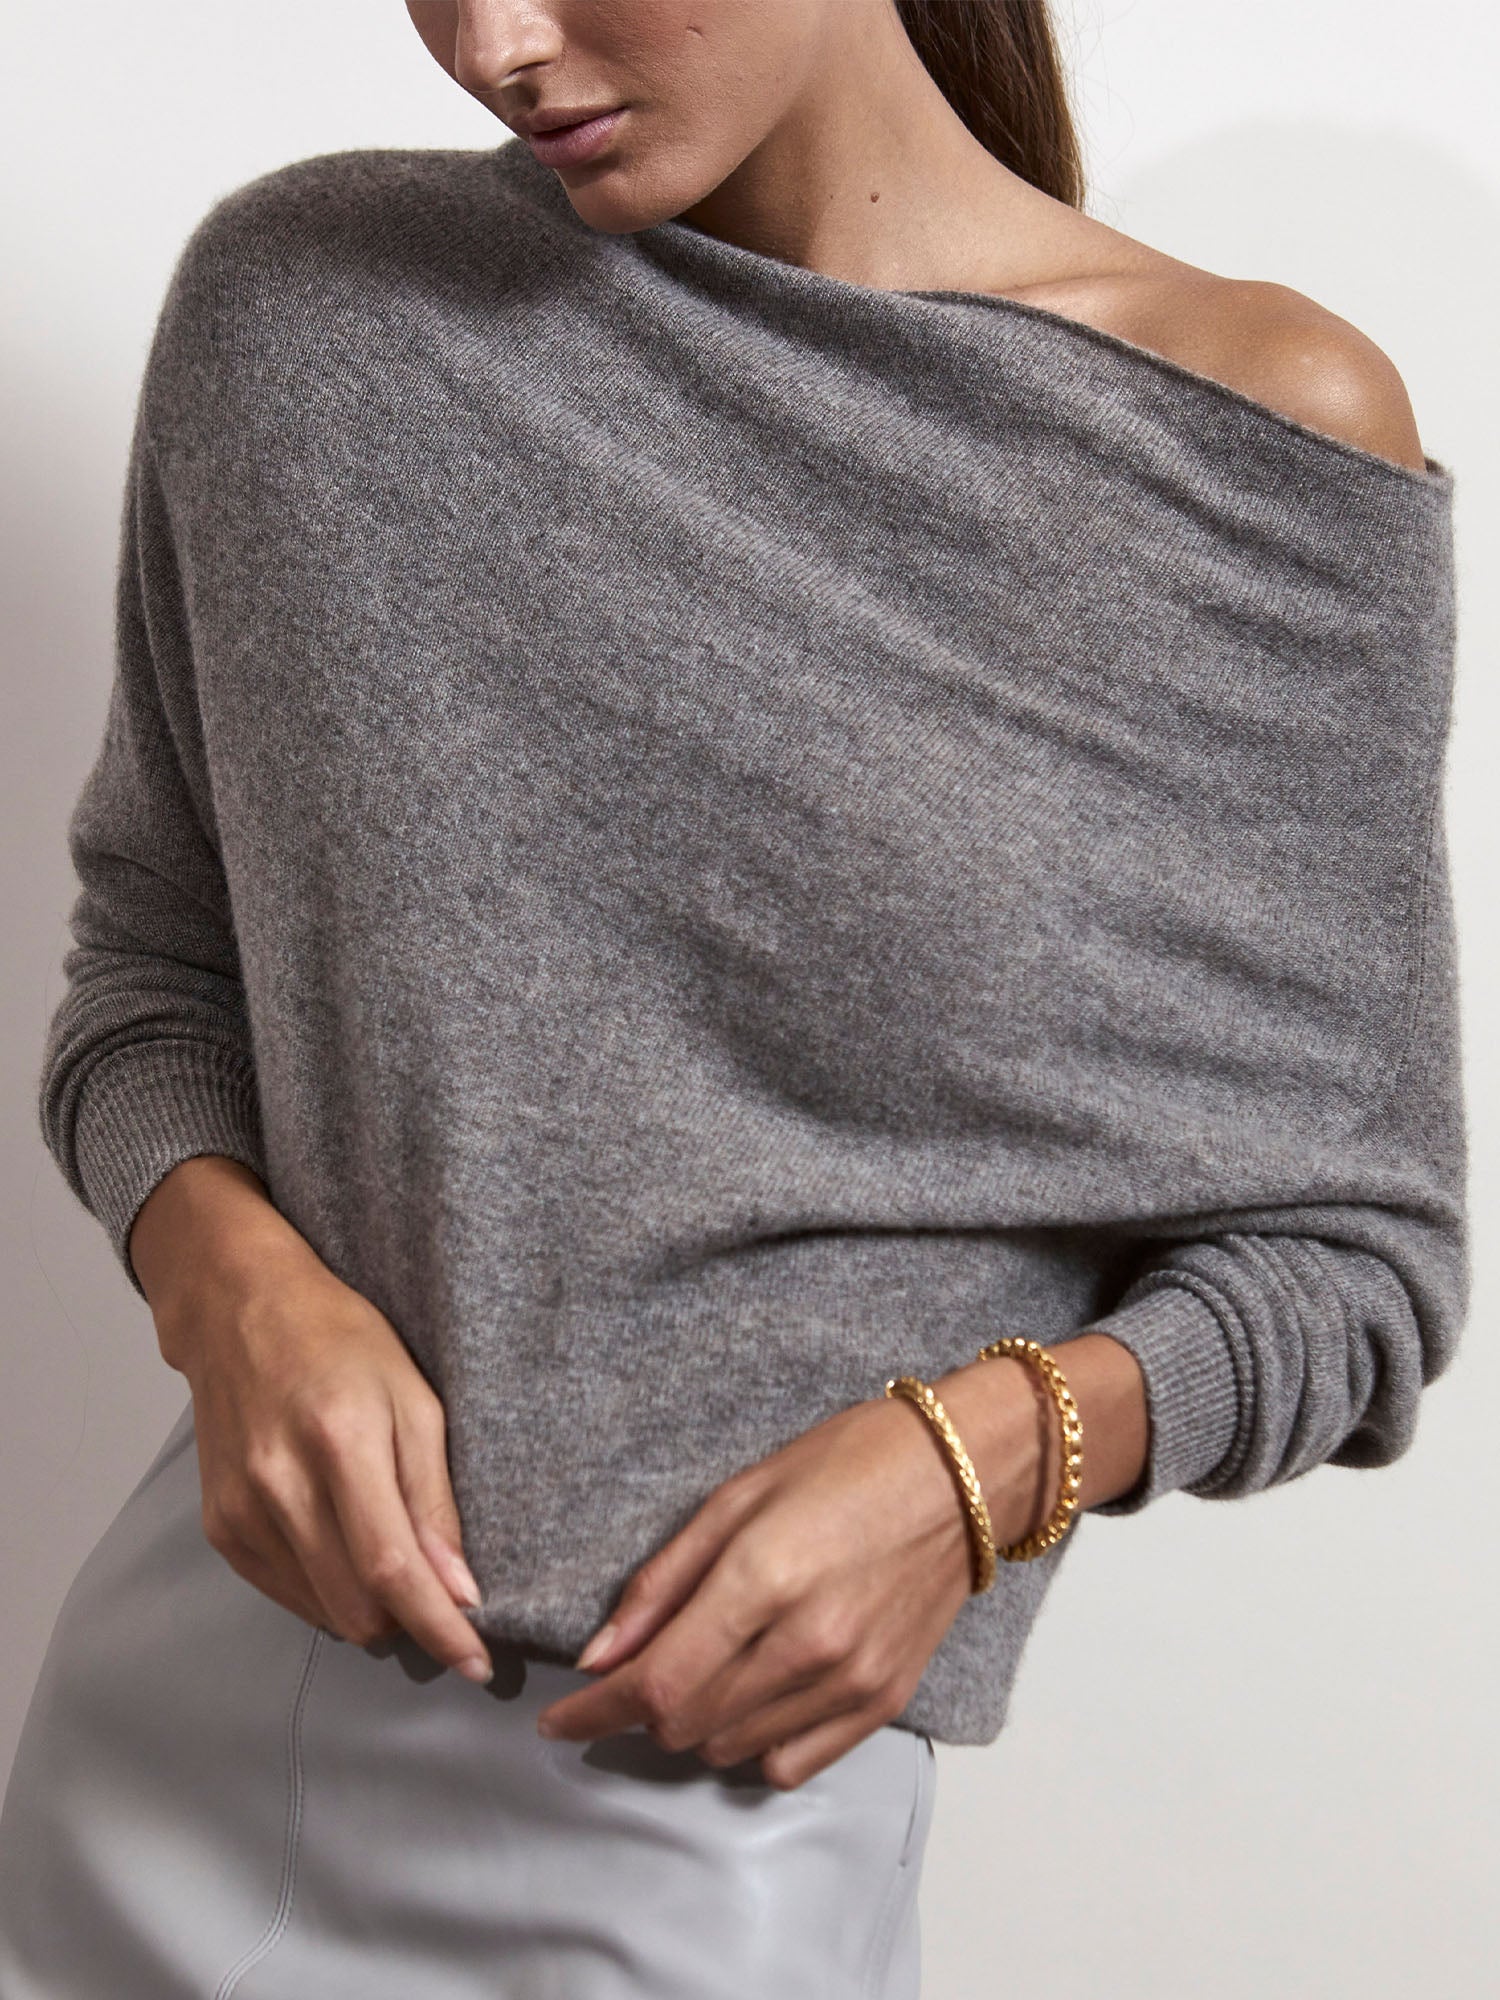 Lori cashmere off shoulder grey sweater front view